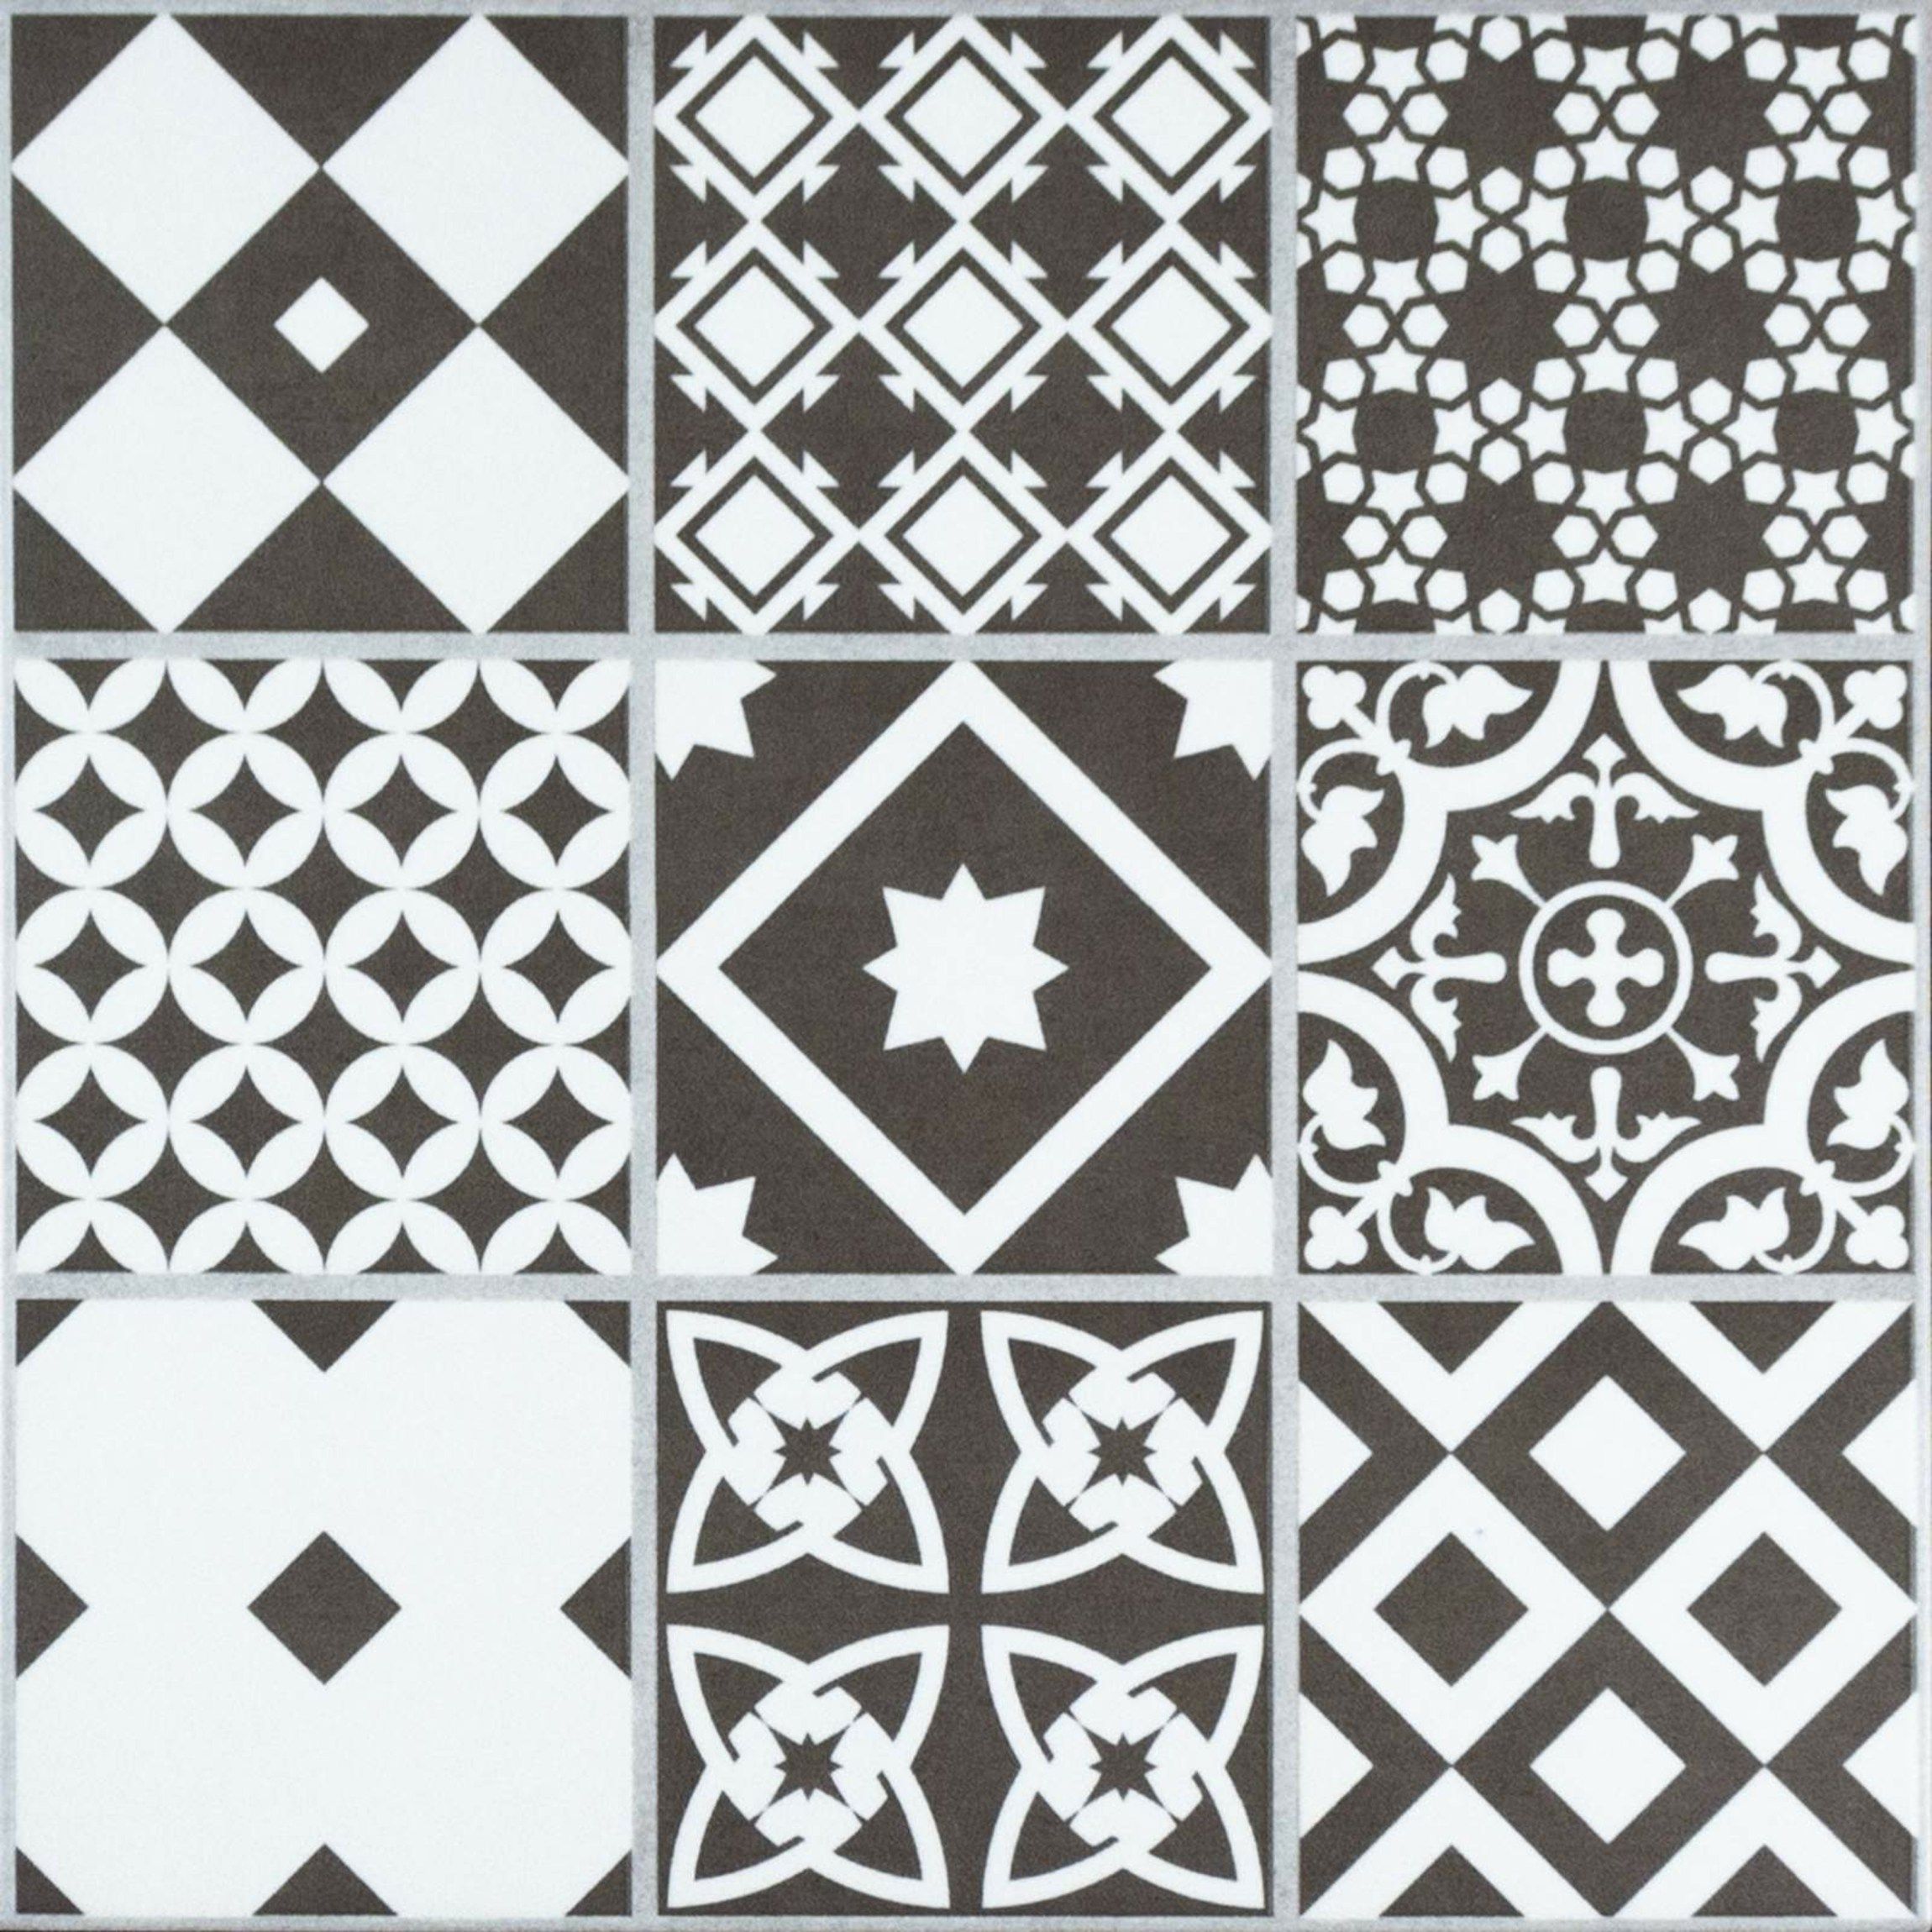 Gatsby Black And White Patchwork Wall, Ceramic Tile Black And White